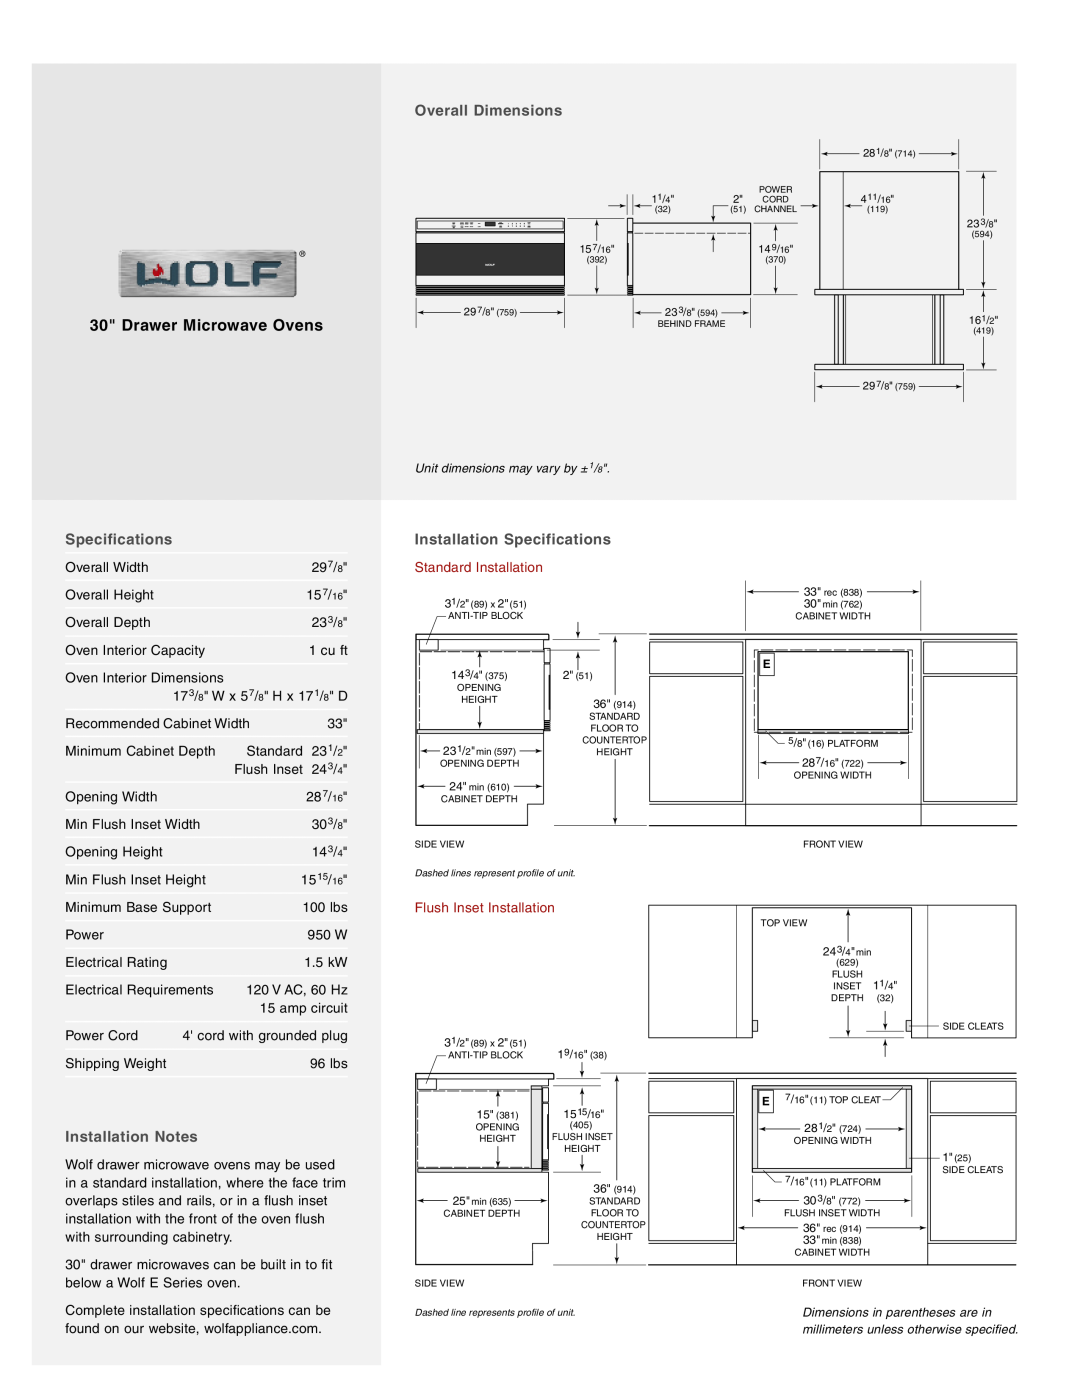 Wolf Appliance Company MWD30-2U/S, MWD30-2F/S manual Overall Dimensions, Installation Specifications, Installation Notes 